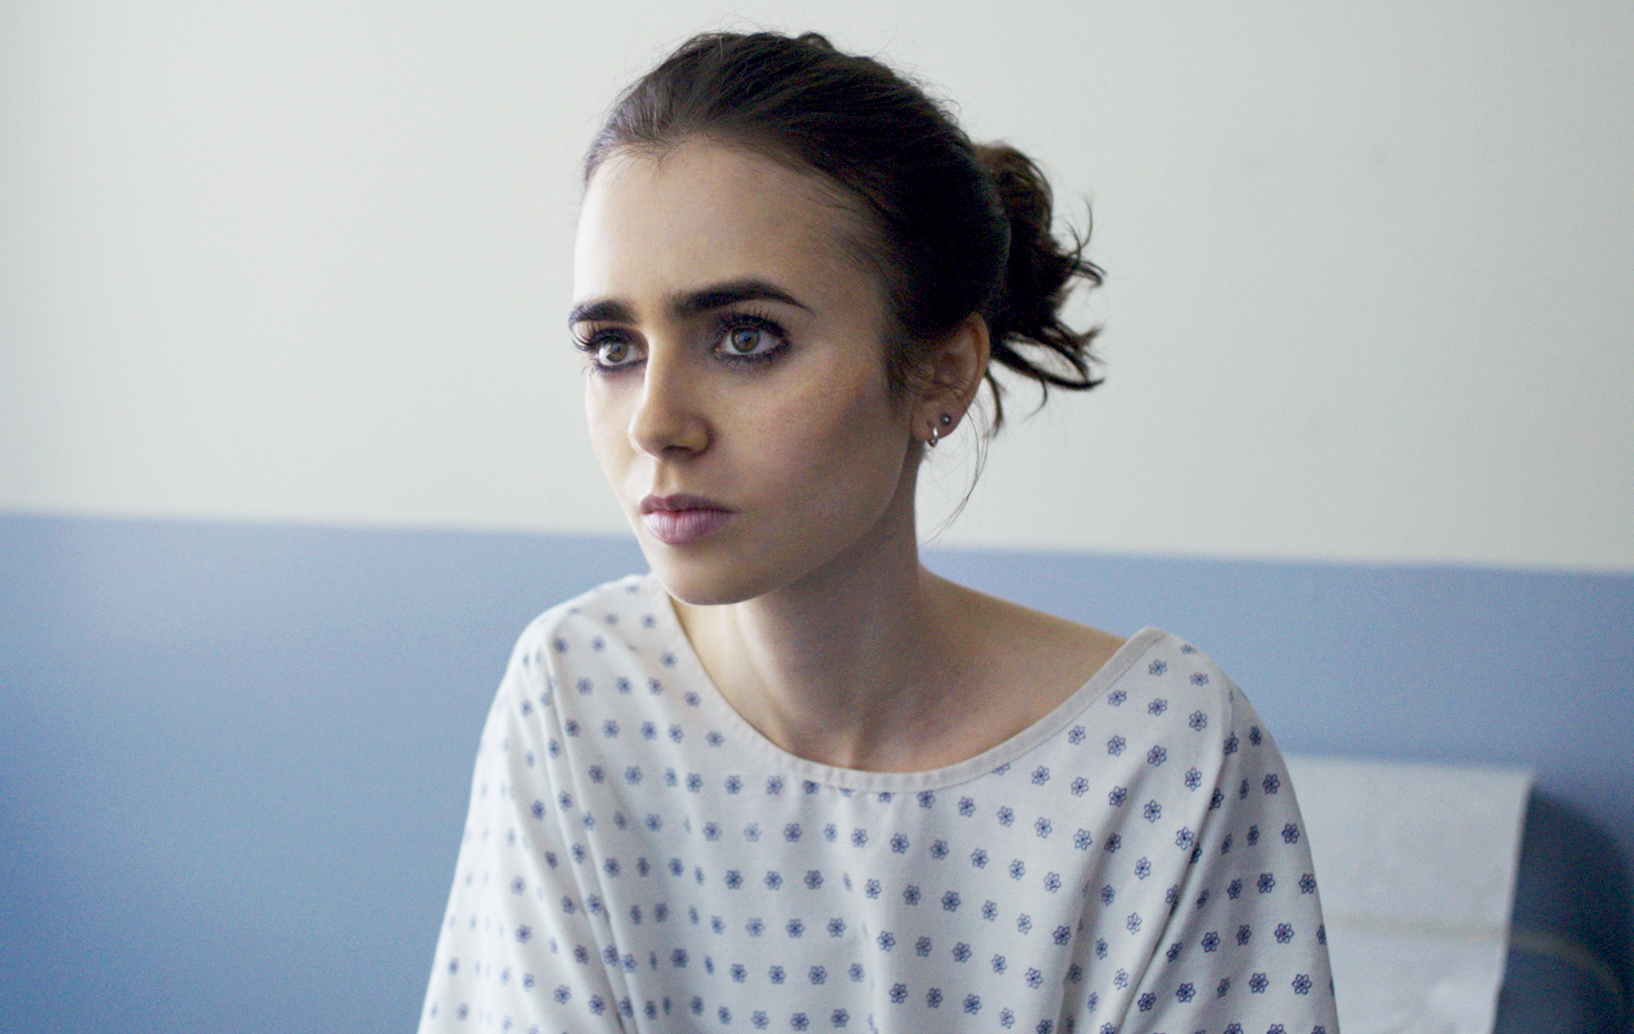 Lily Collins Was Praised For Losing Weight To Play Anorexic Character